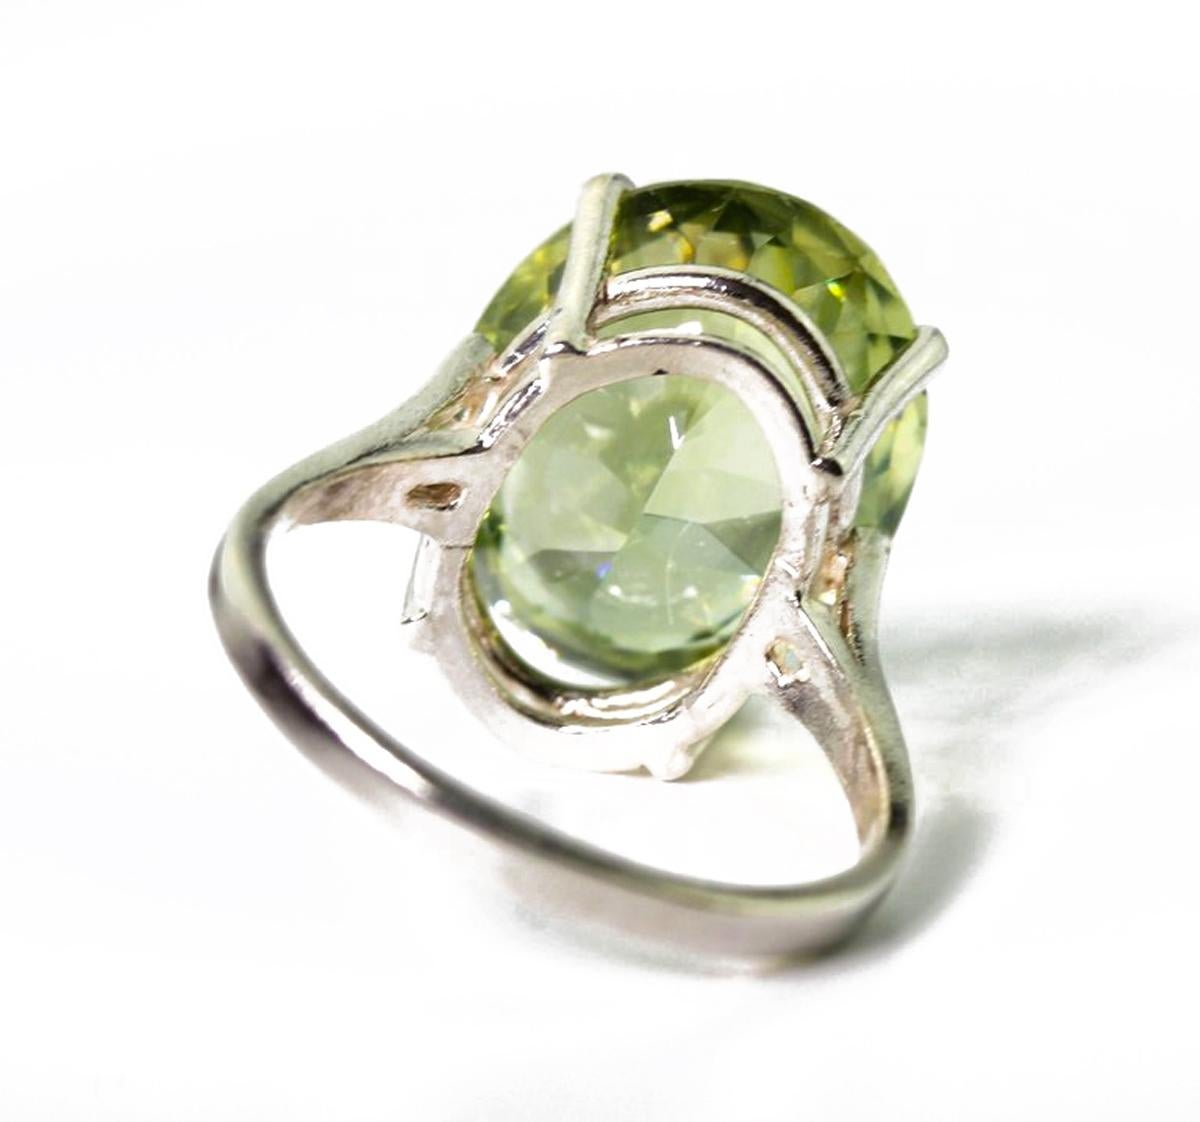 AJD Gorgeous 14.48 Cts Oval Natural Sri Lankan Green Zircon Cocktail Ring For Sale 2